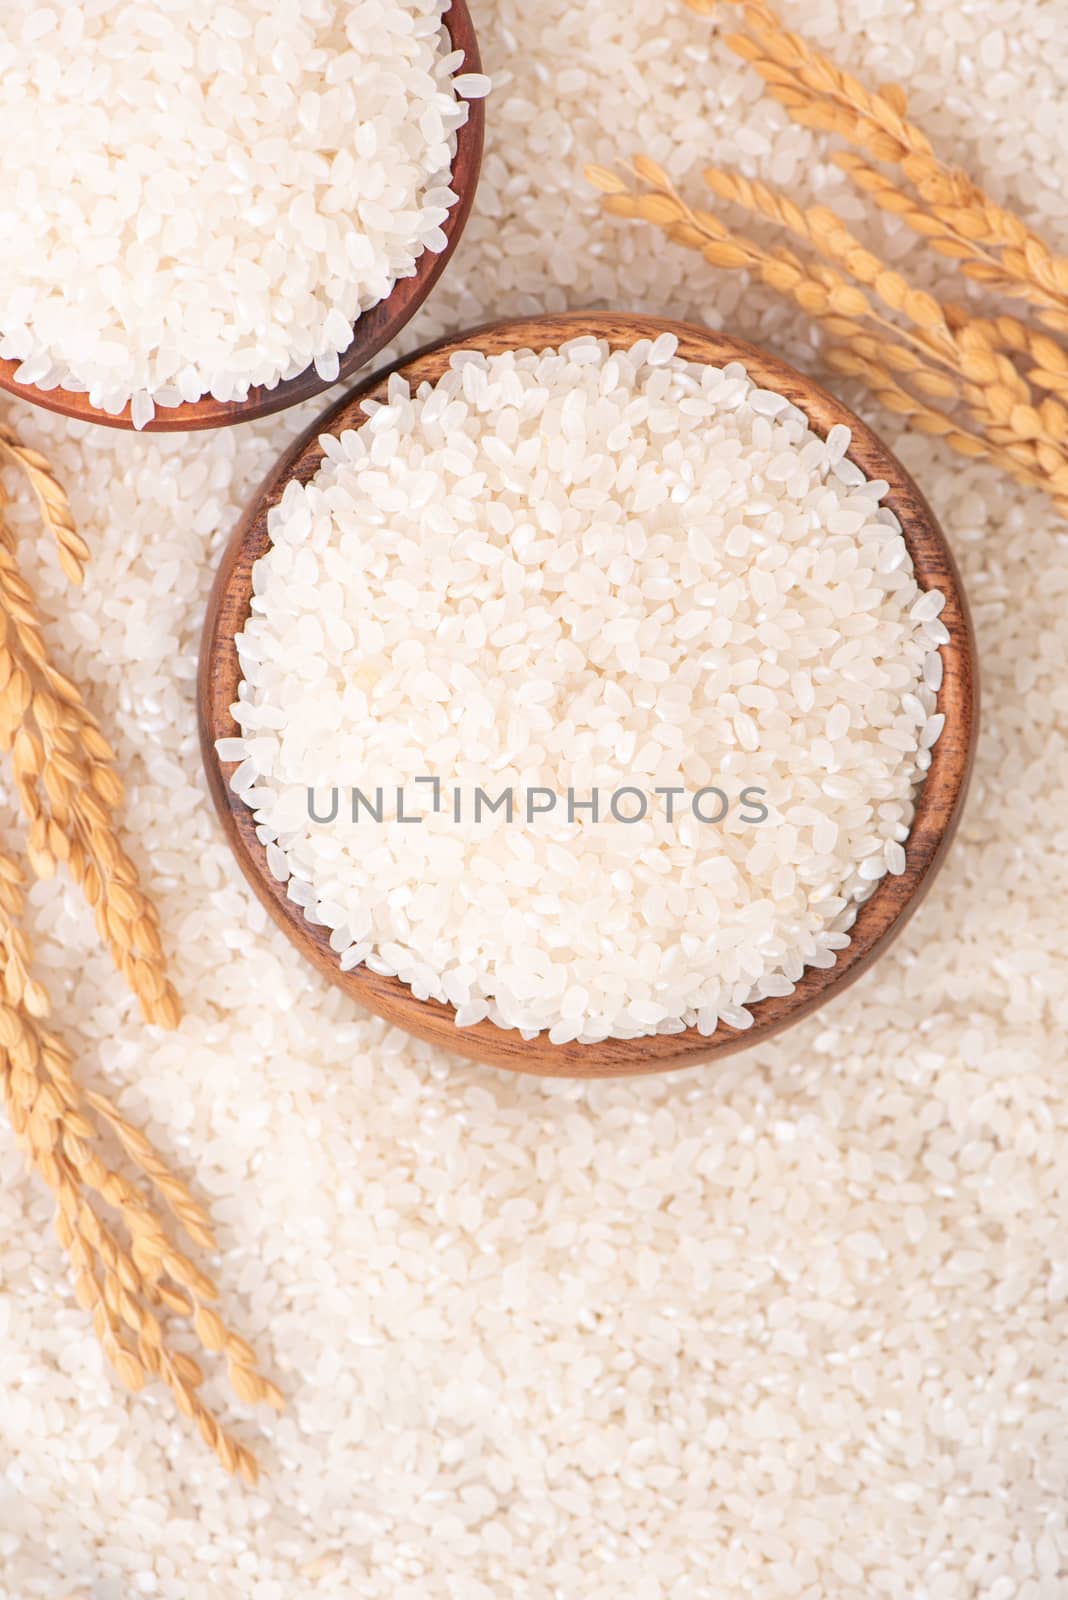 Raw rice in a bowl and full frame in the white background table, top view overhead shot, close up